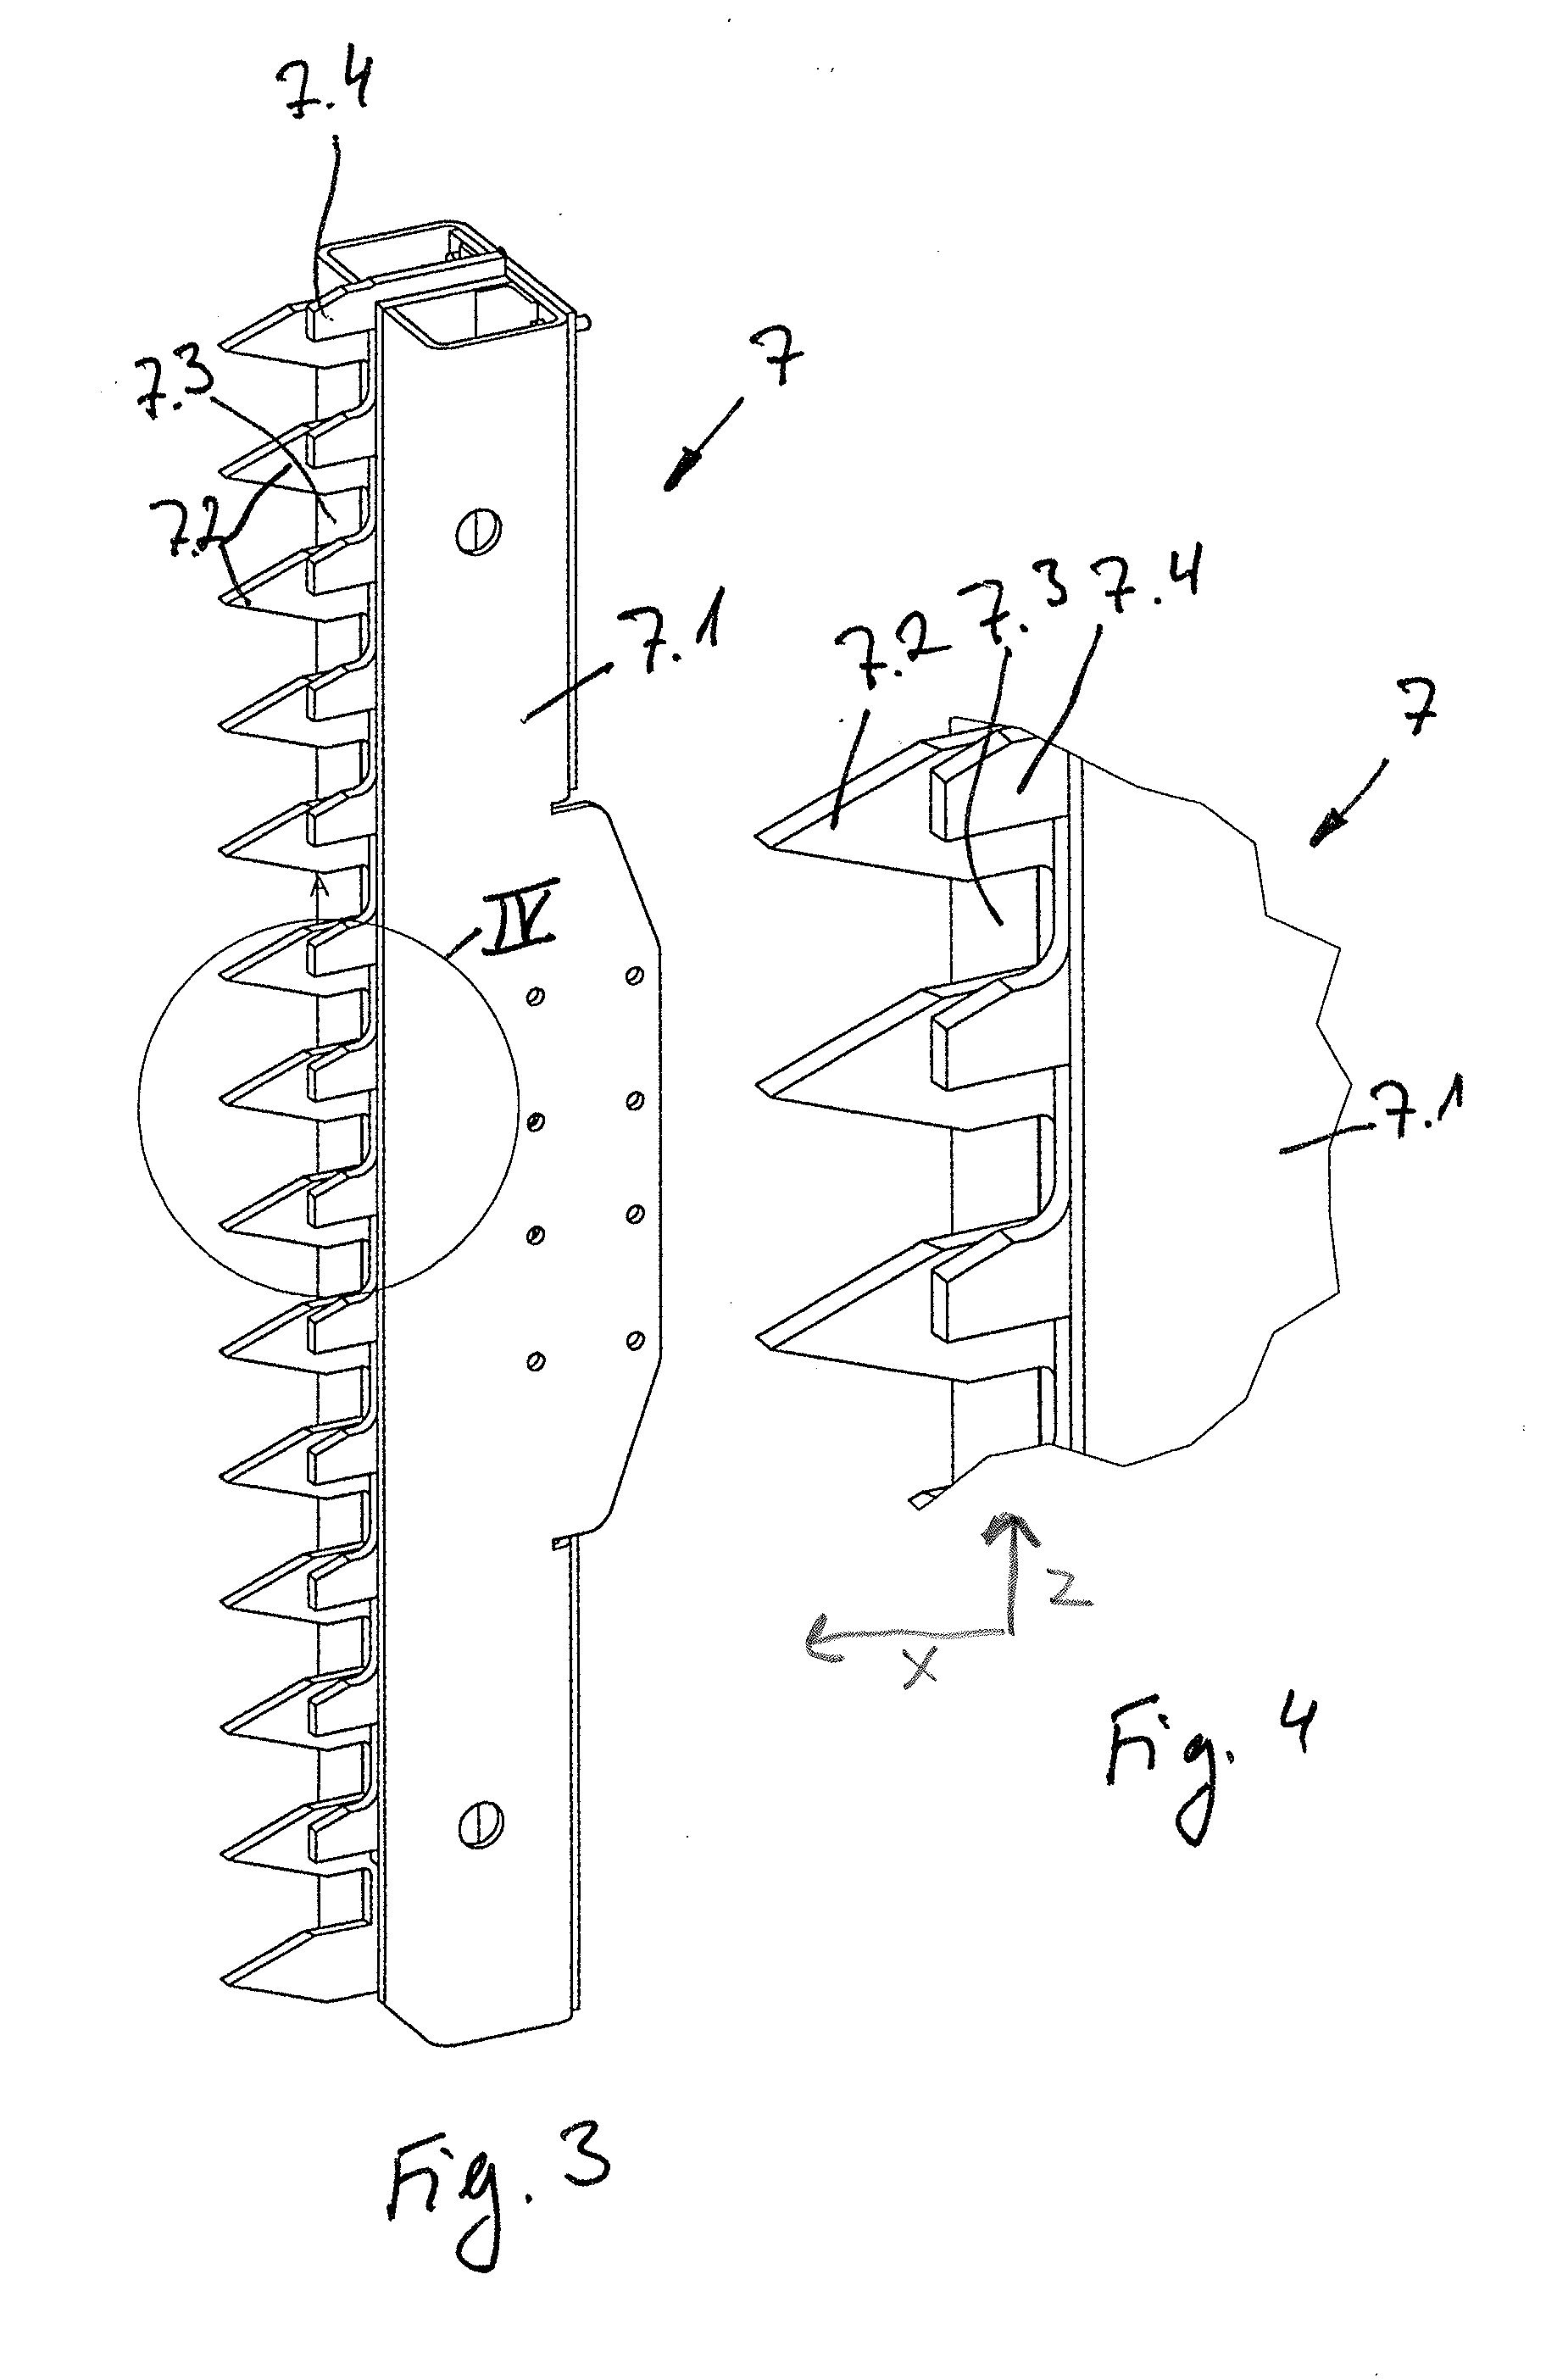 Device to remove binding materials from packaged bulk goods